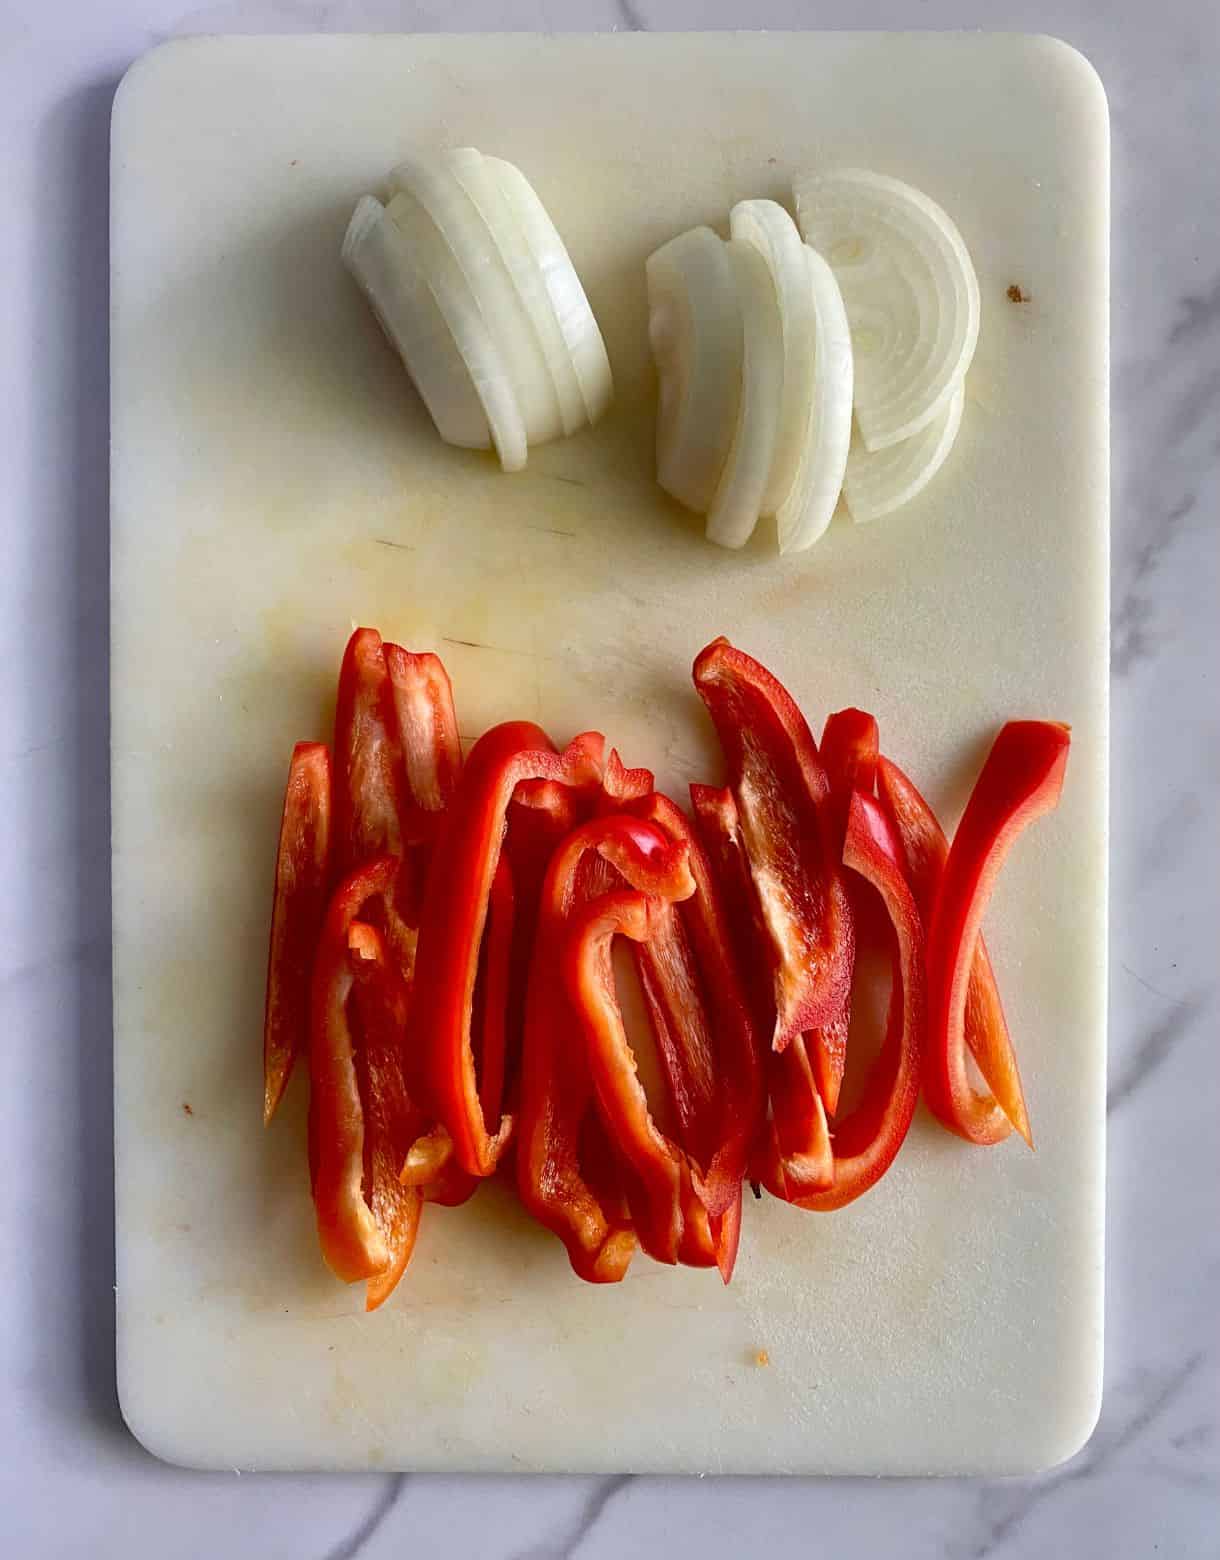 A cutting board with sliced onion and red bell pepper.